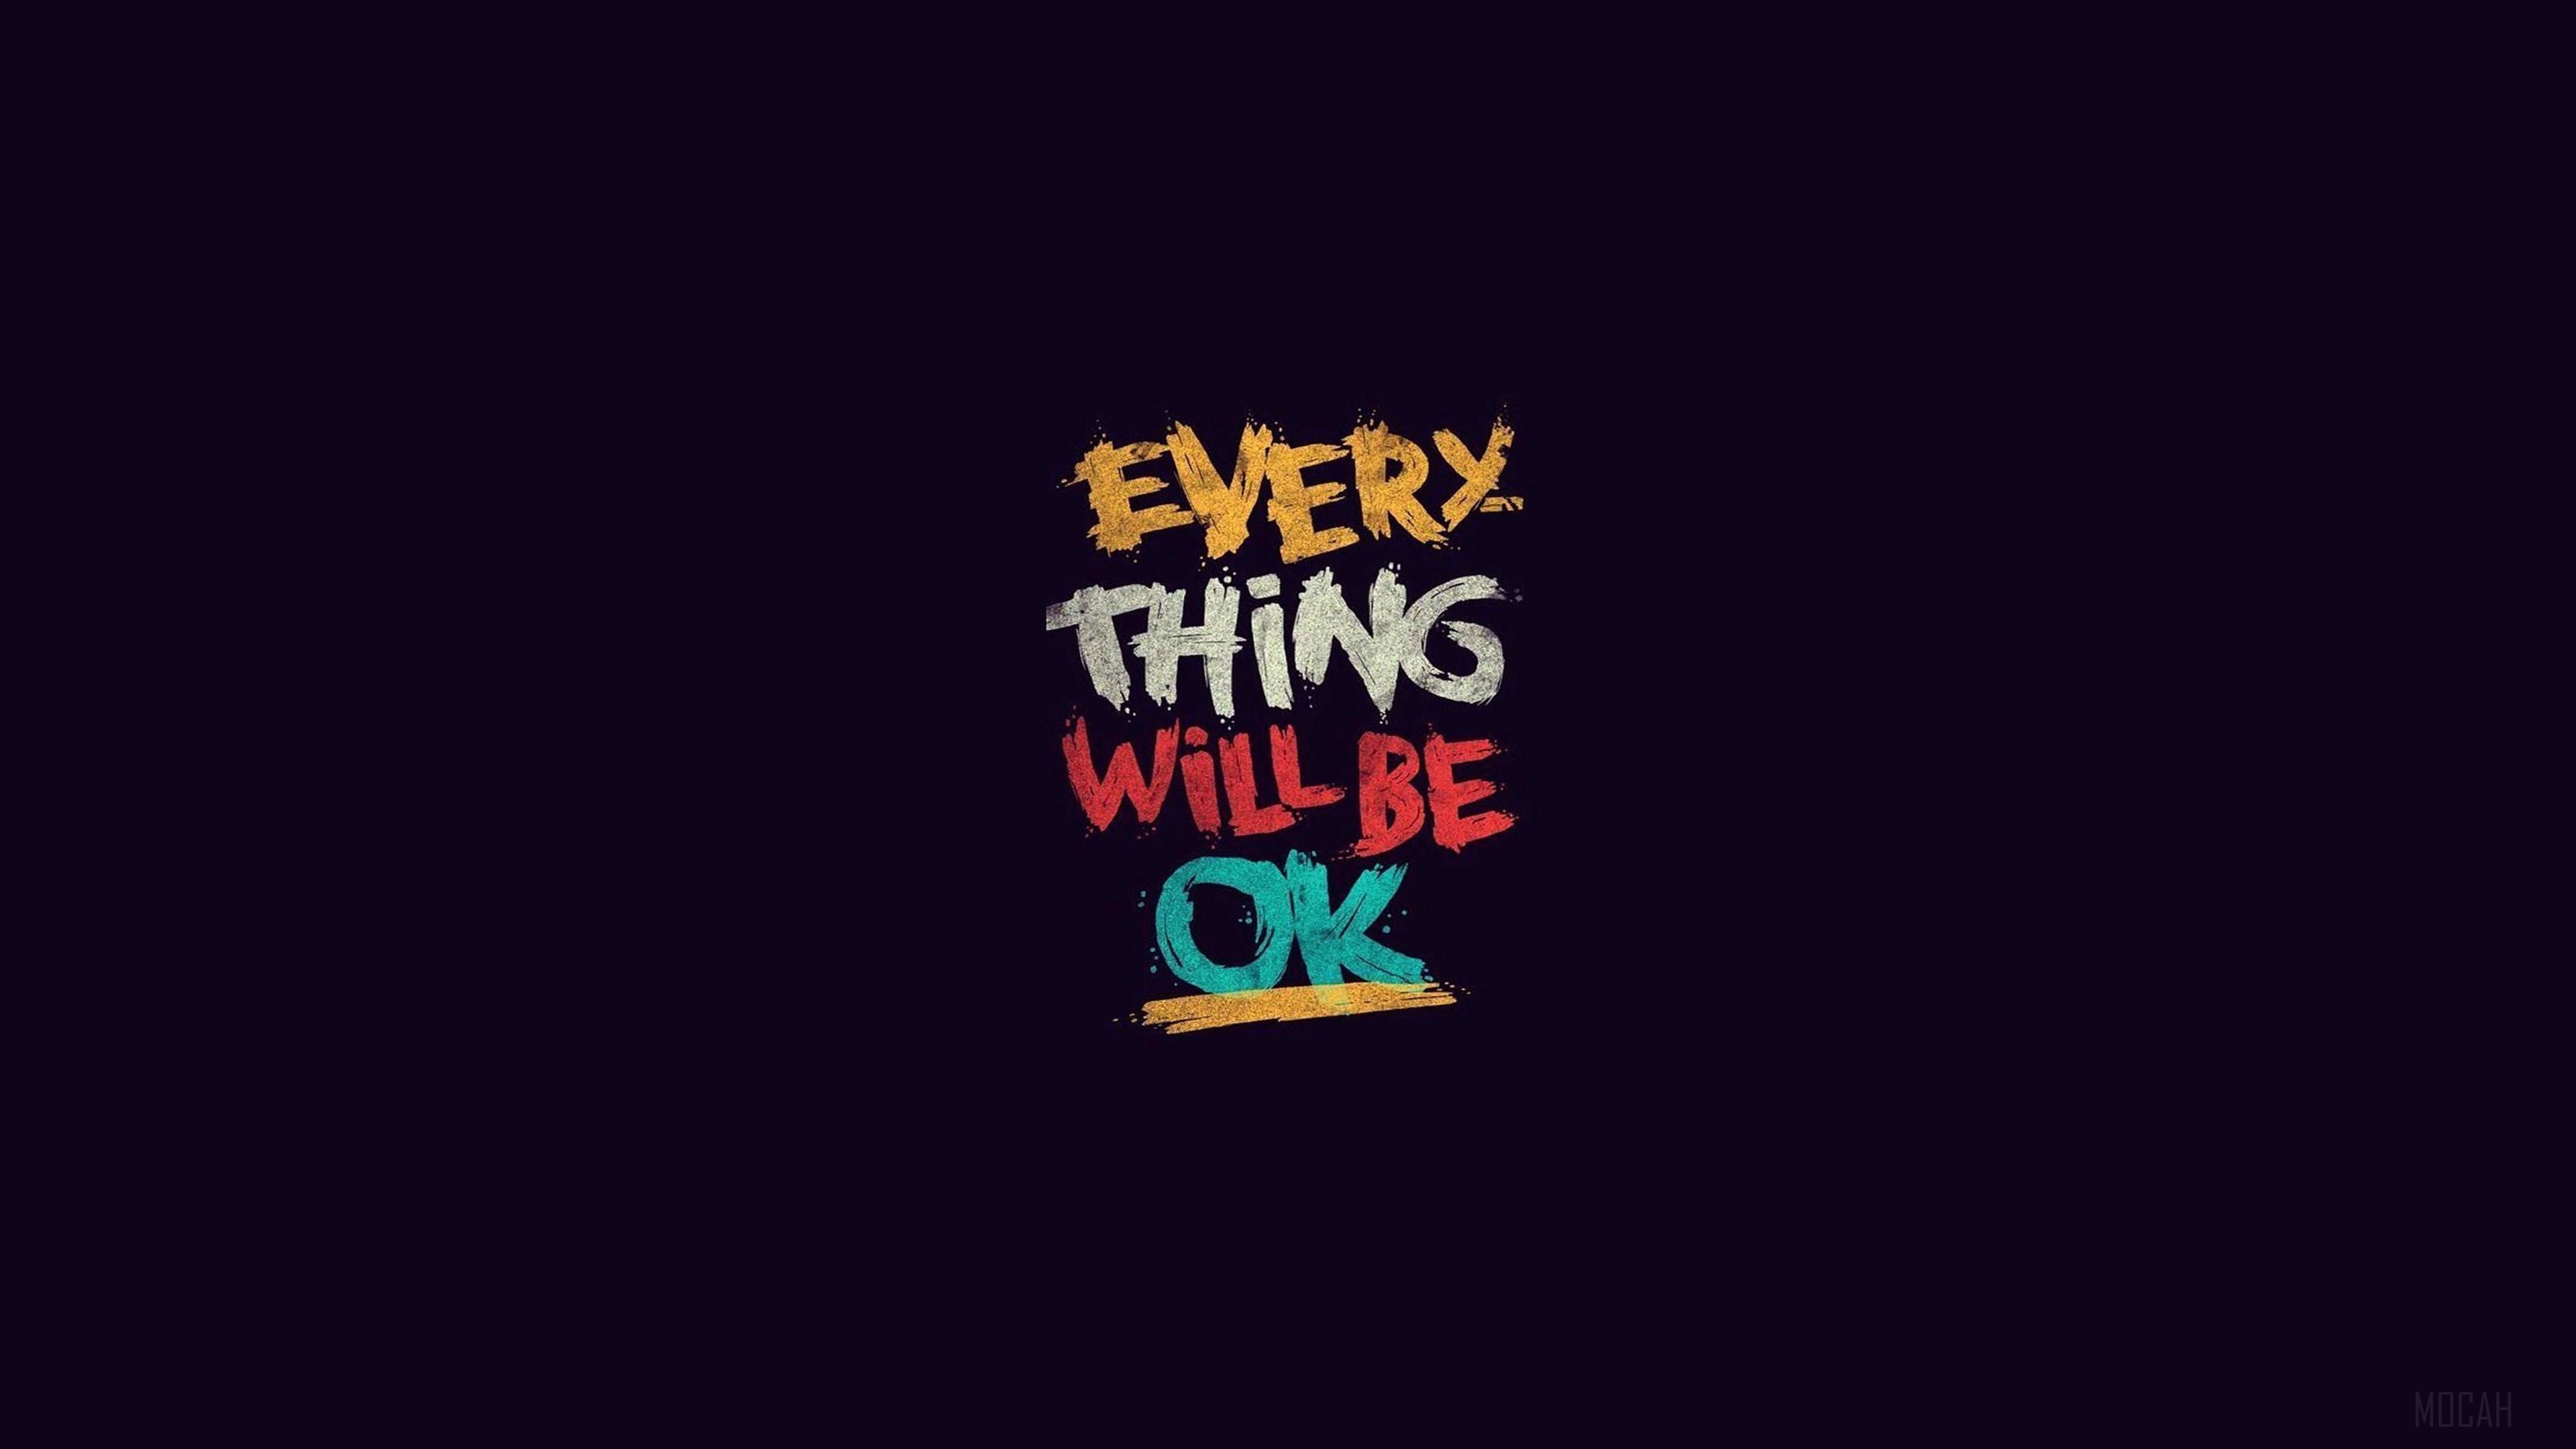 HD wallpaper, Everything Will Be Ok 4K